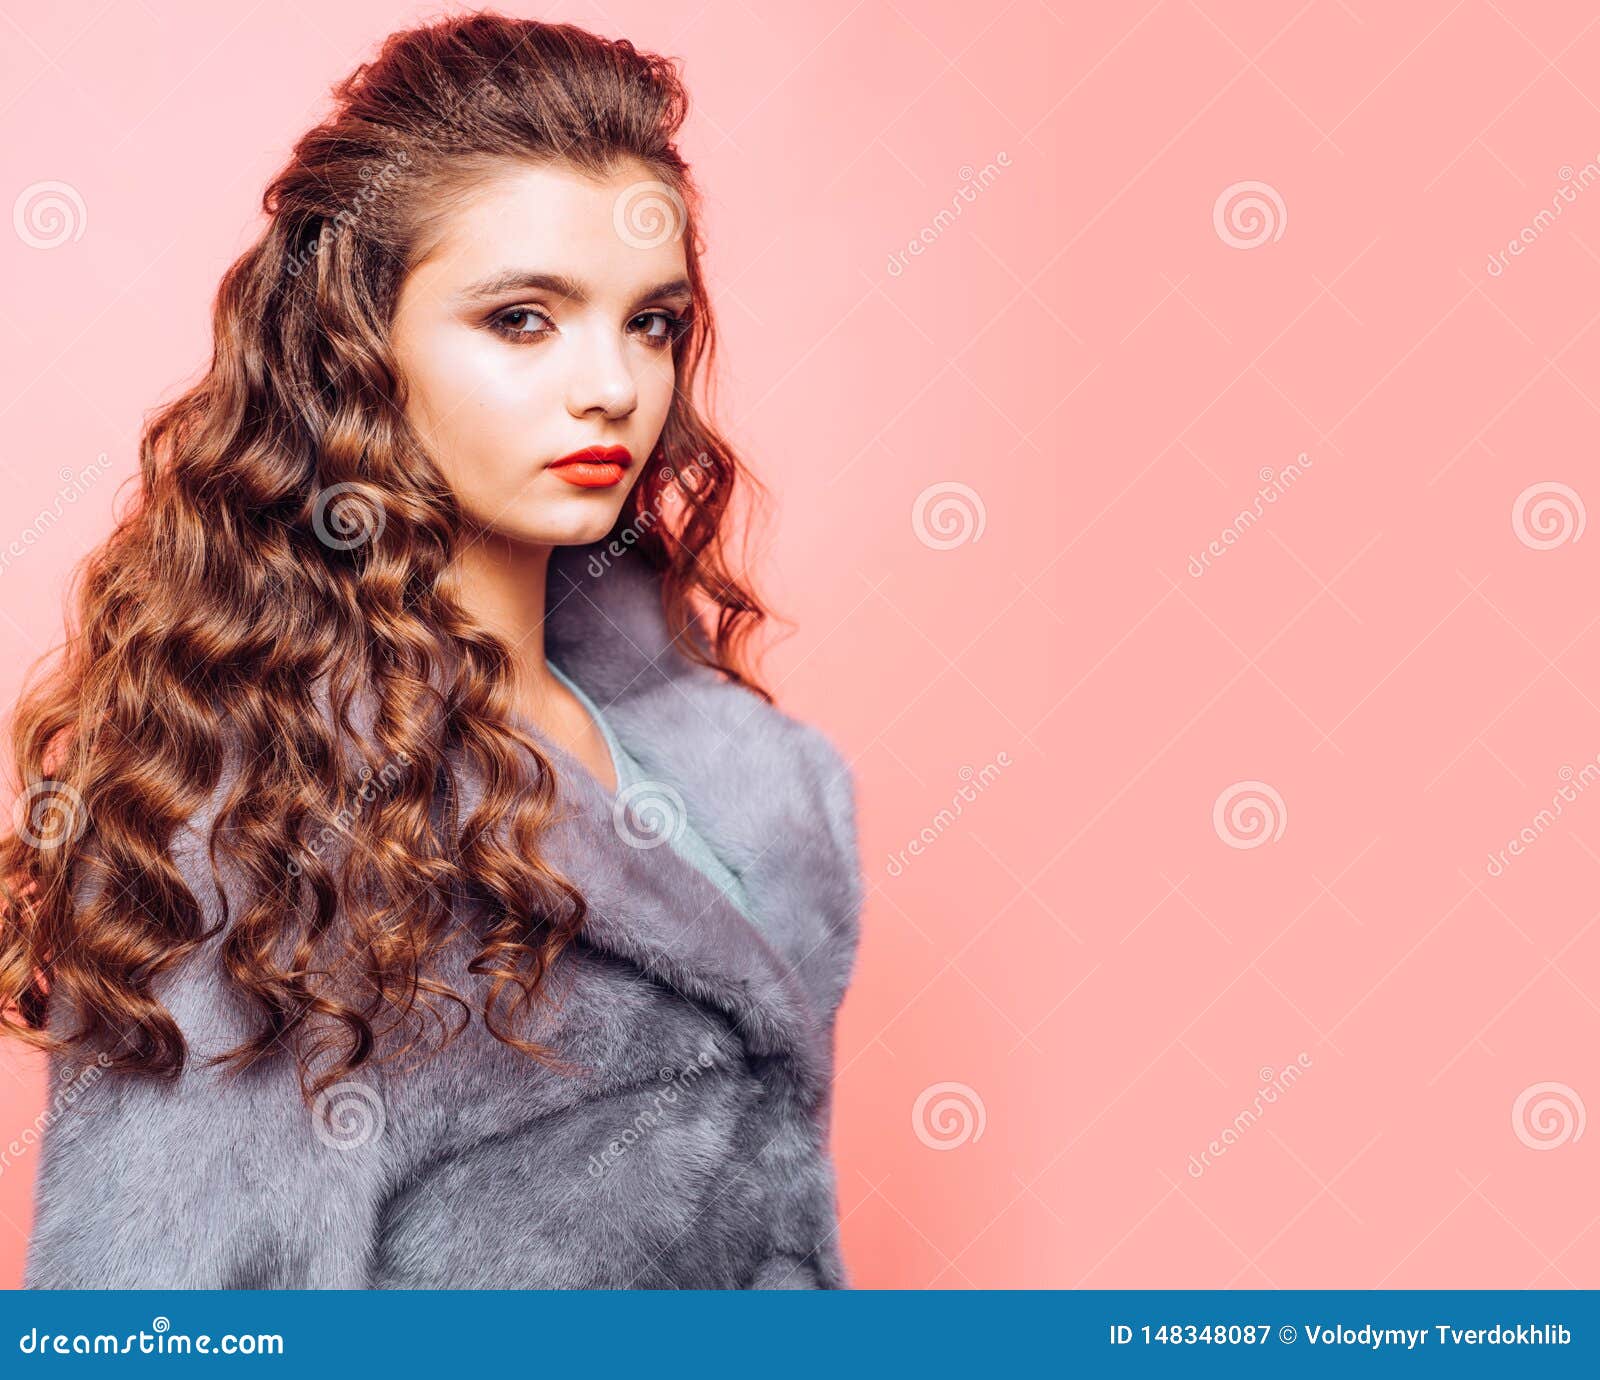 Healthy Hair Care Habits. Teenage Girl with Stylish Wavy Hairstyle. Pretty  Girl with Curly Hairstyle Stock Image - Image of stylish, beauty: 148348087